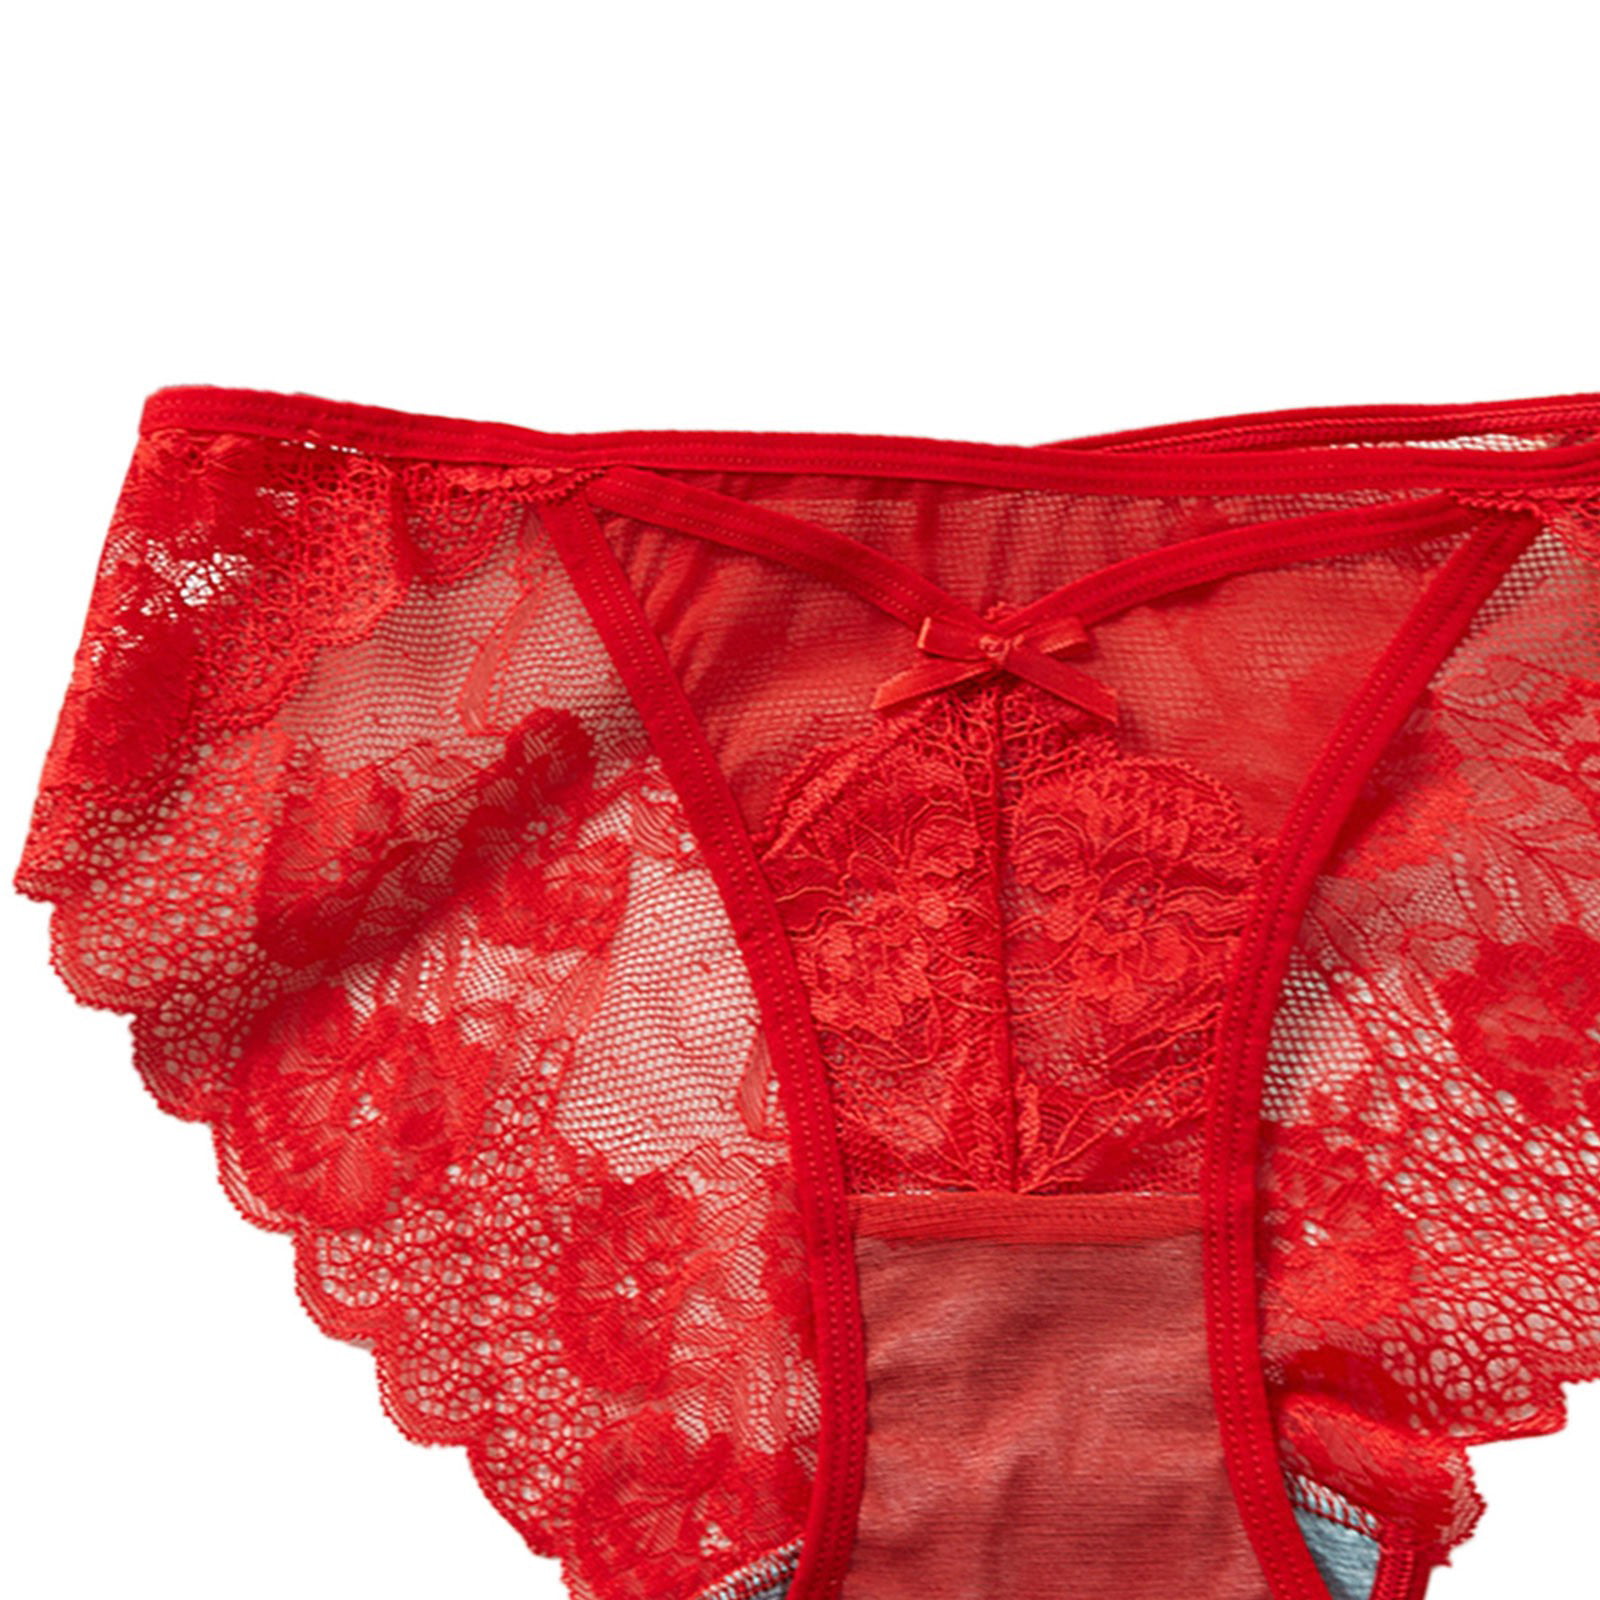 Brief panty, Red, Woman